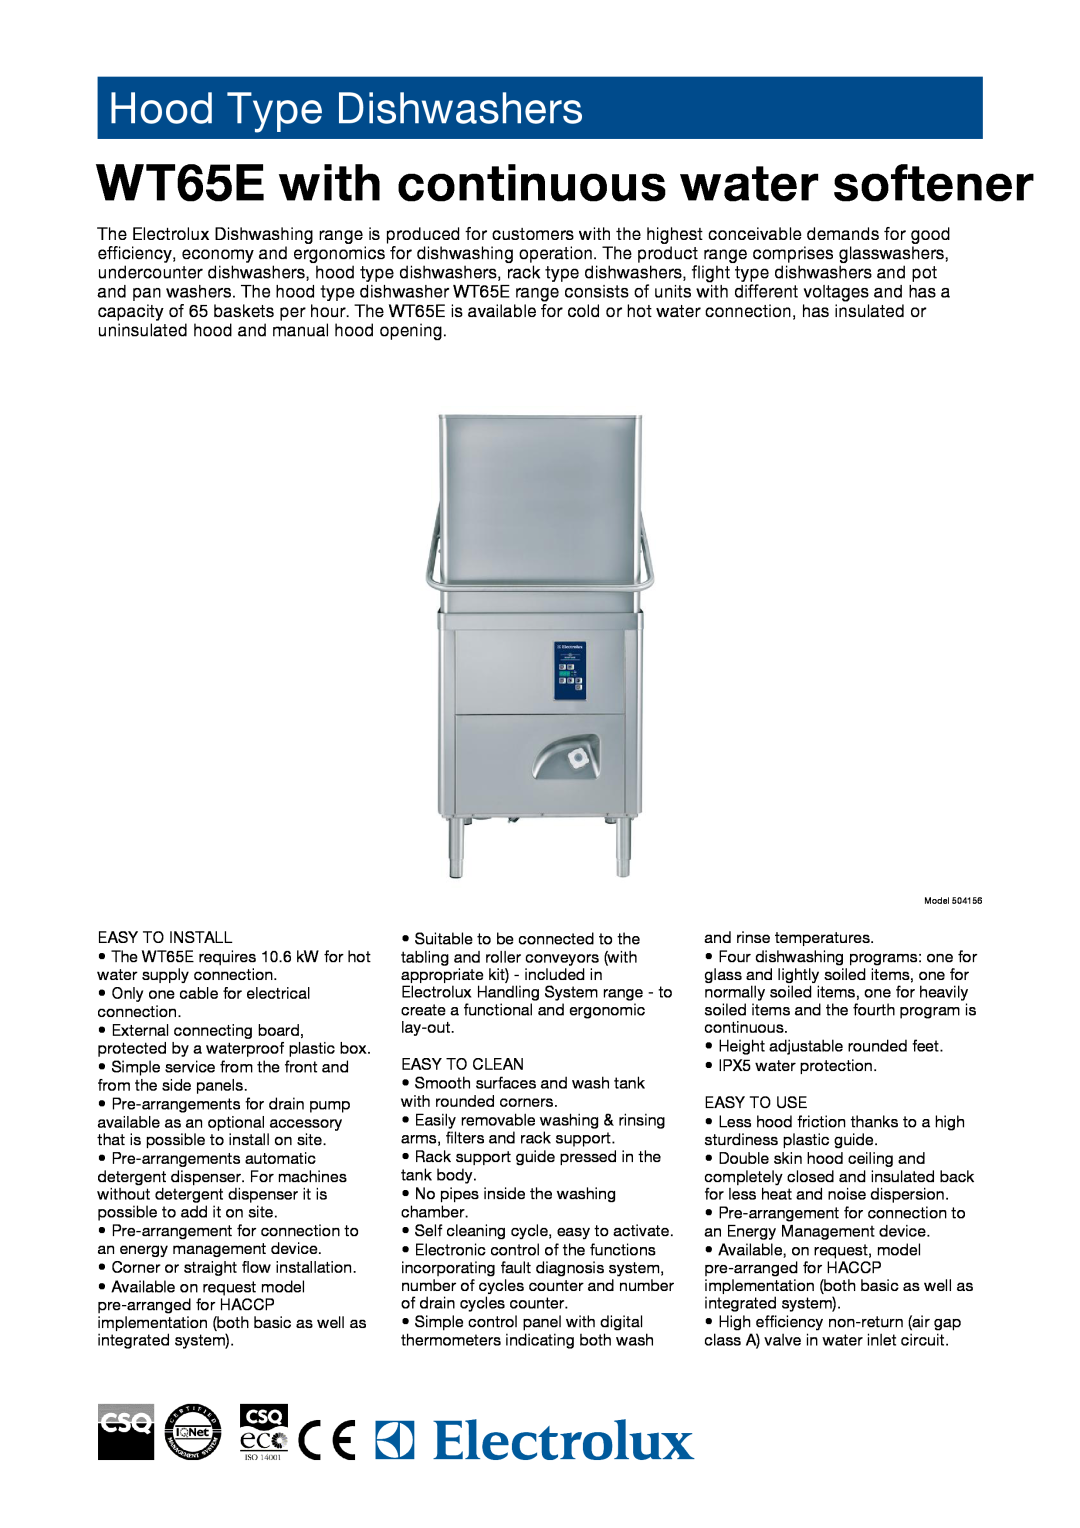 Electrolux 504156 manual WT65E with continuous water softener, Hood Type Dishwashers 